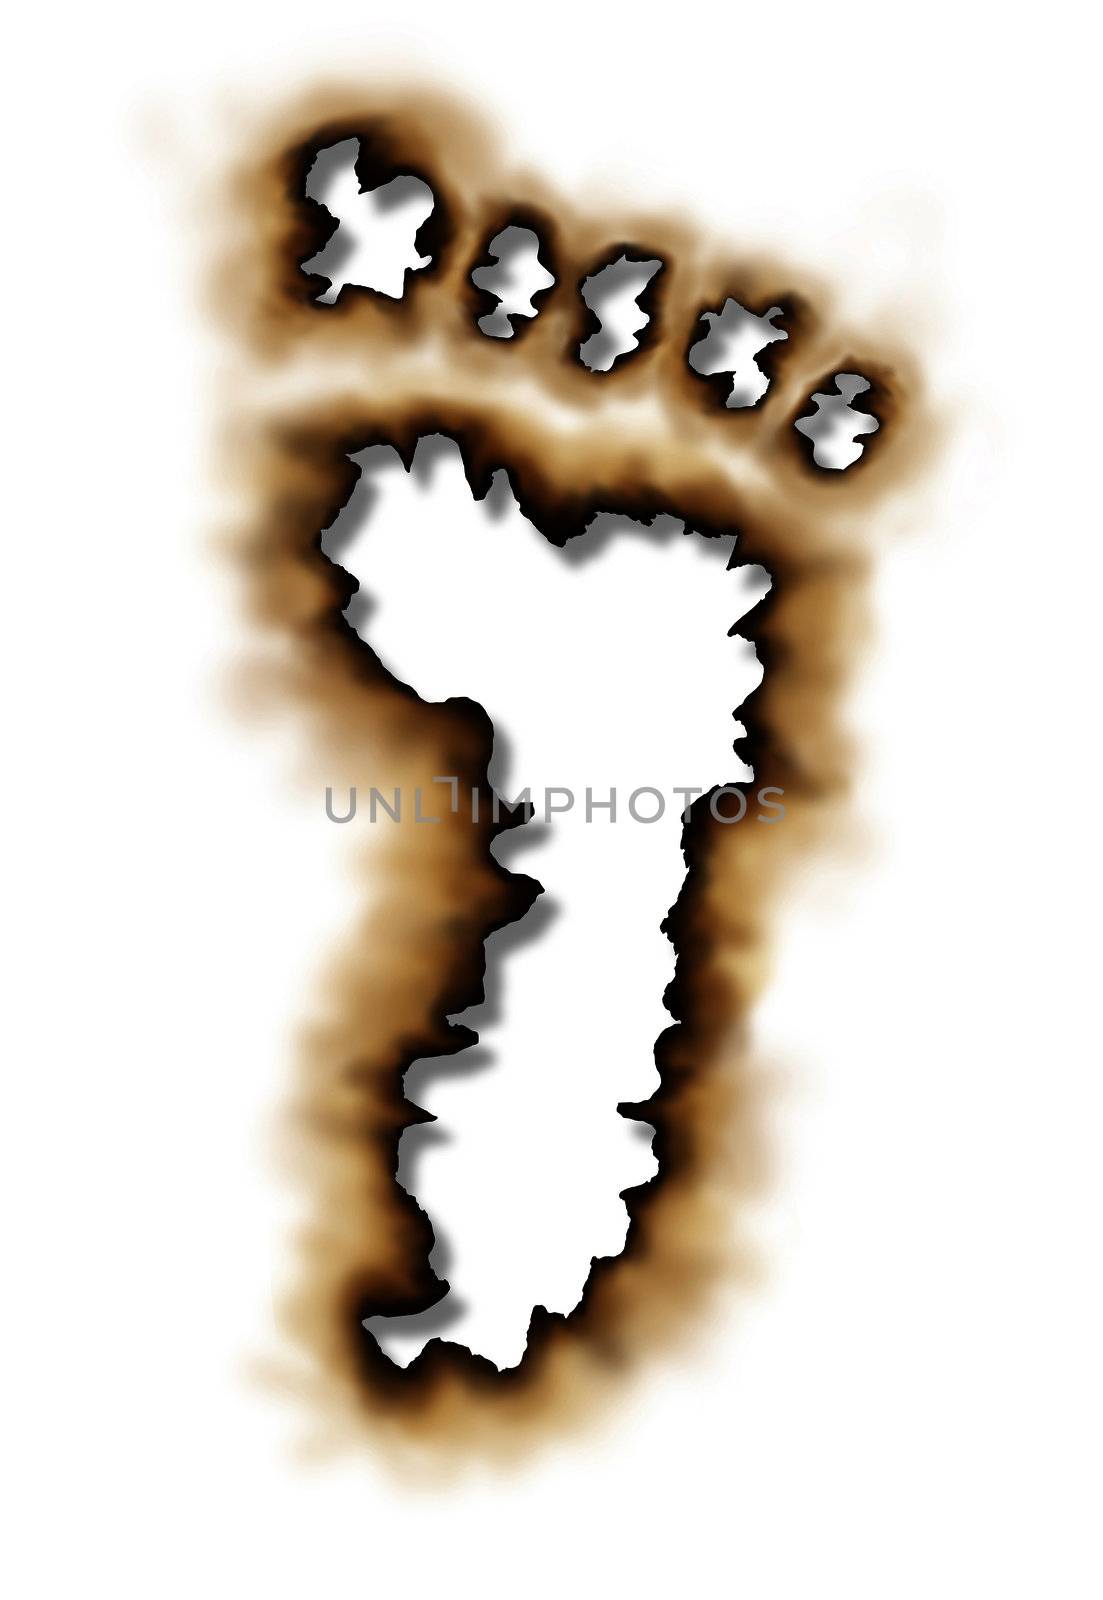 Carbon footprint or conservation symbol with  damaged burnt paper edges in the shape of a foot print as an icon of global warming with nature and the environment stopping pollution due to burning on a white background.